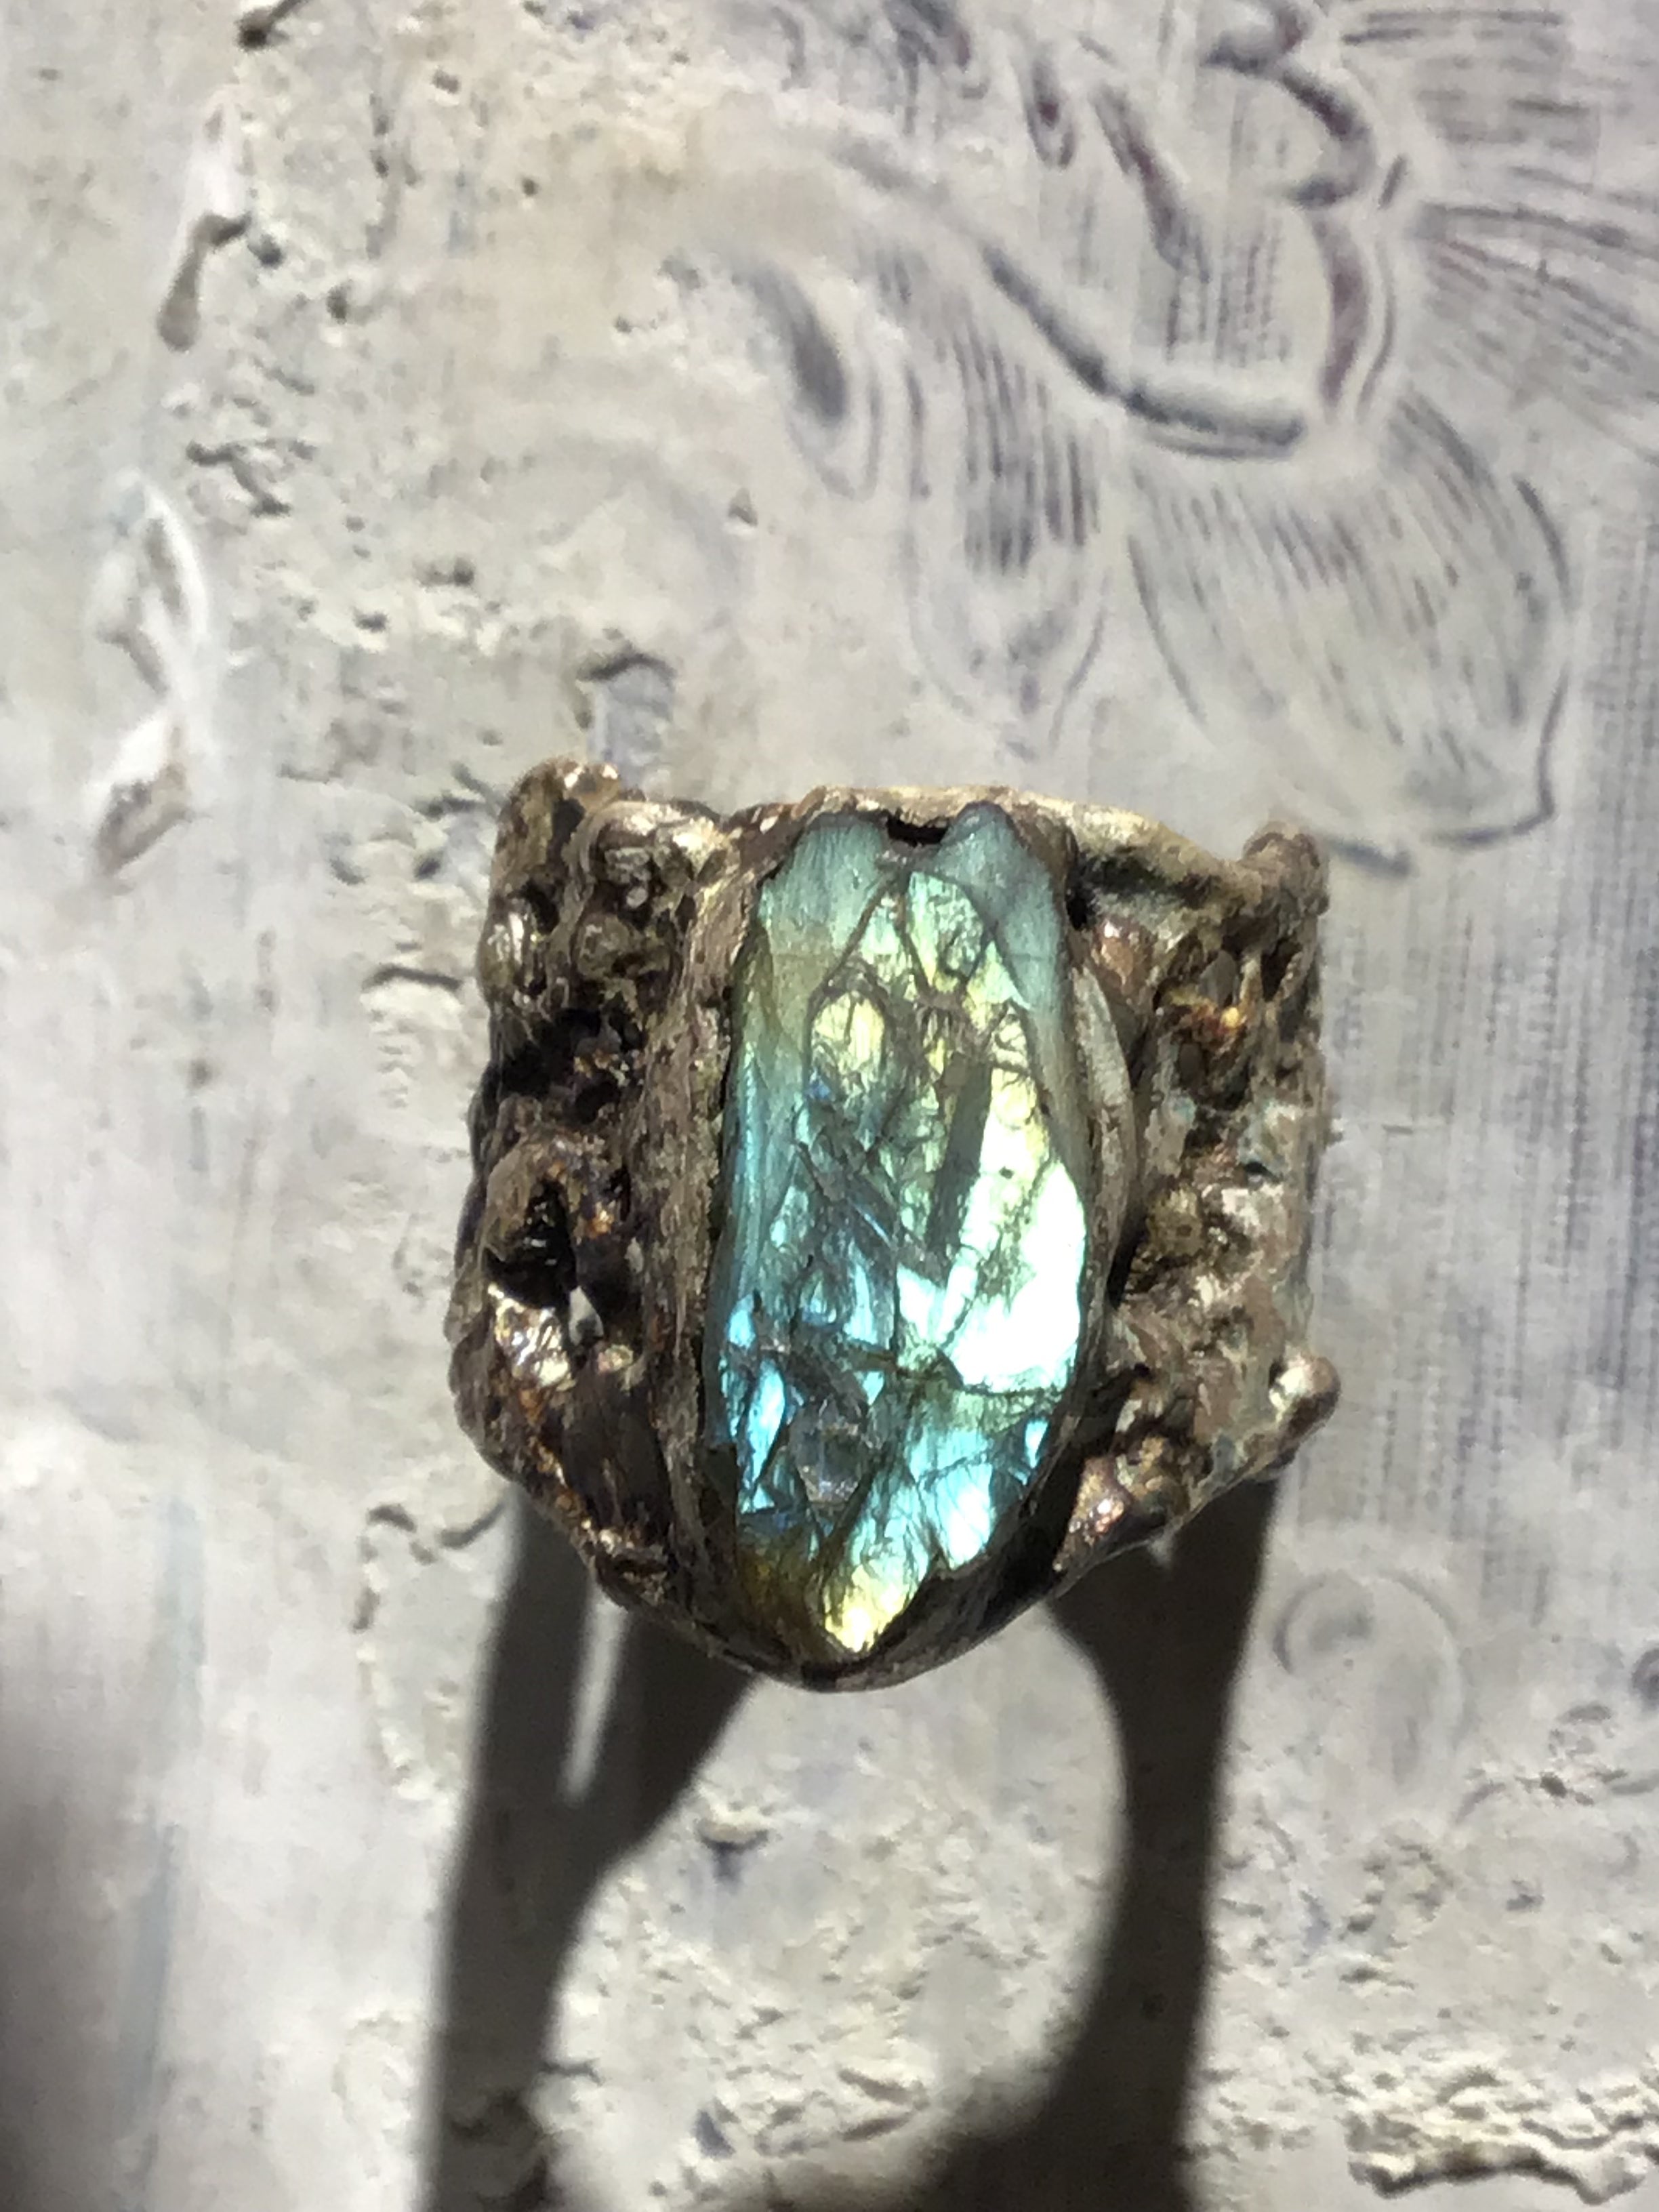 Oxdised Silver Linen Giant Labradorite Ring